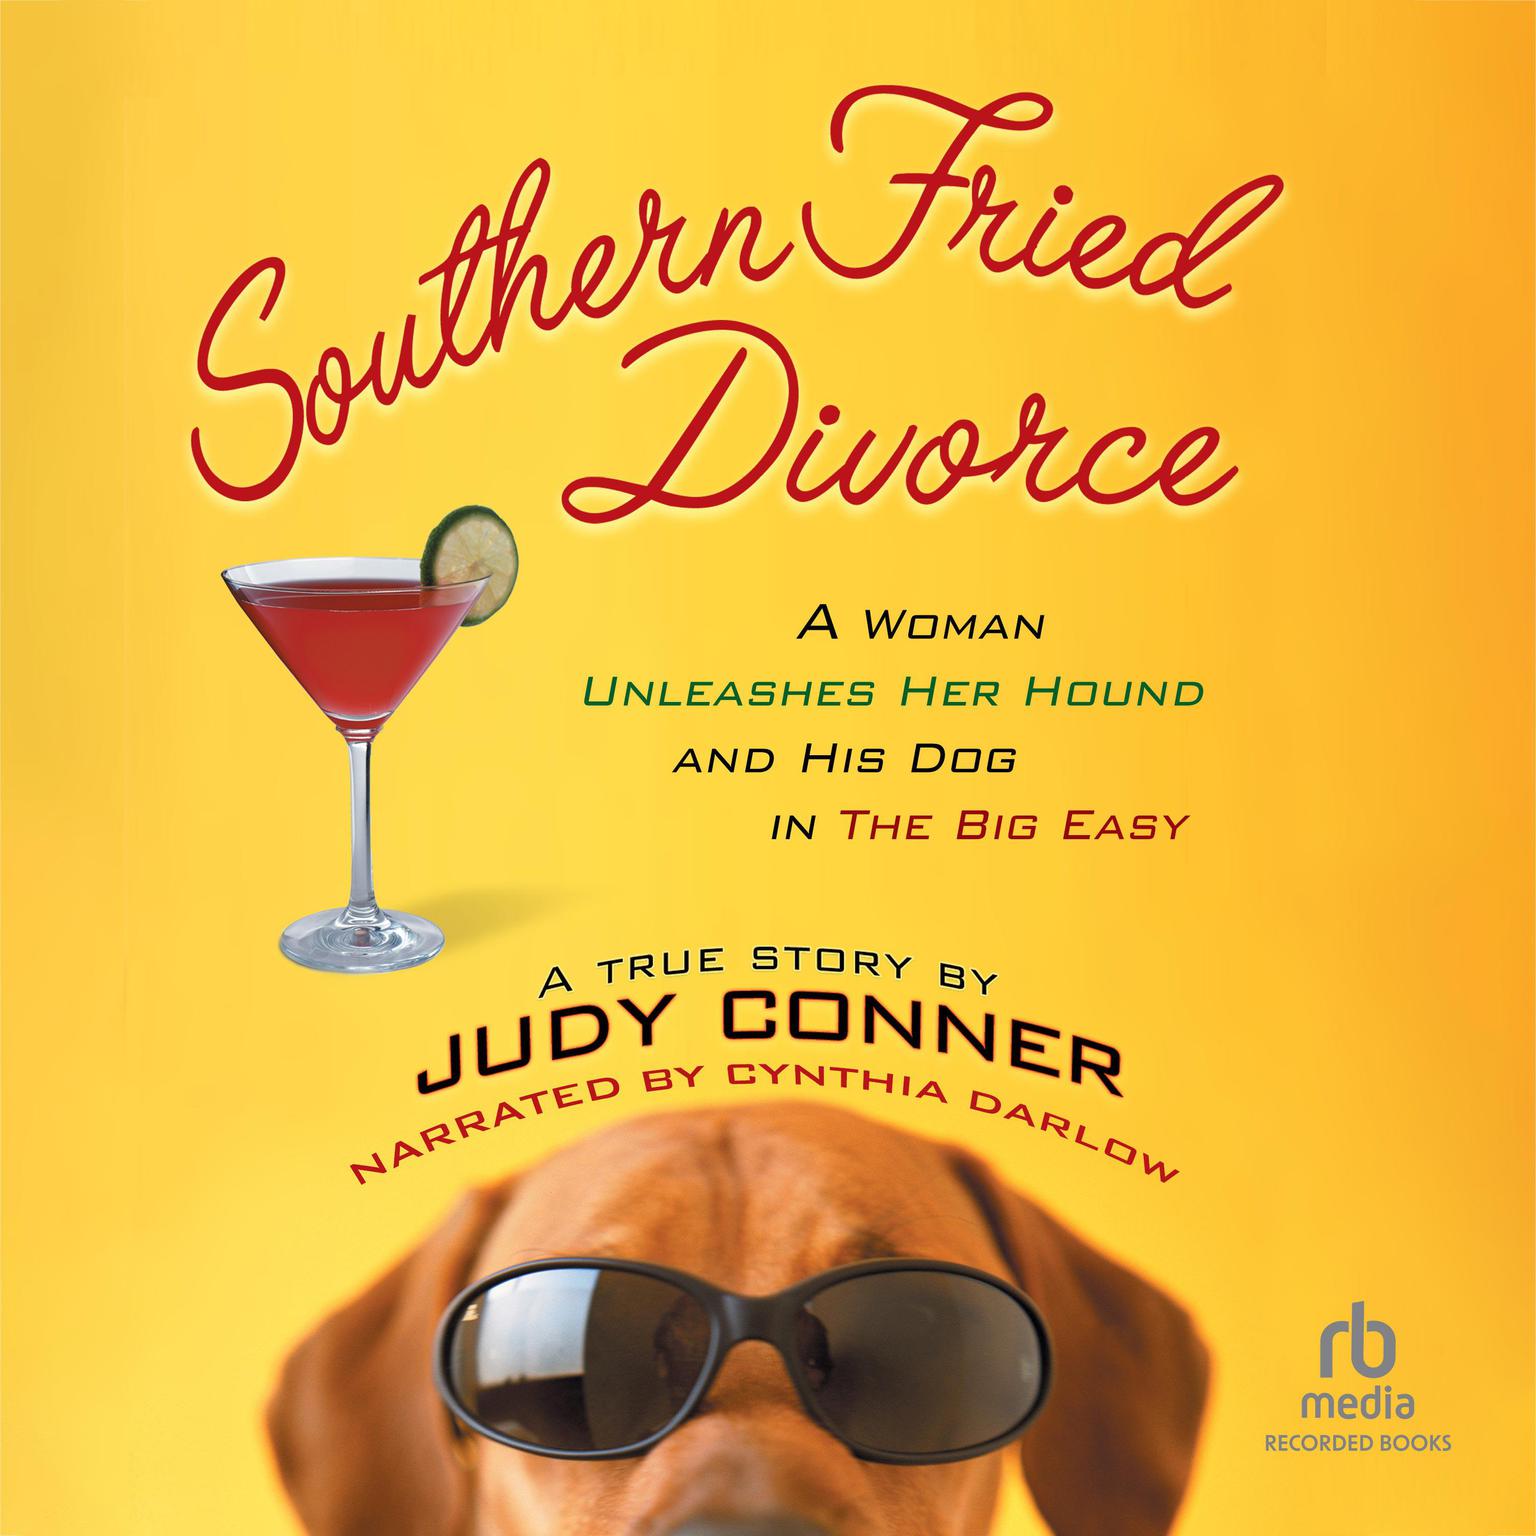 Southern Fried Divorce: A Woman Unleashes Her Hound and His Dog in the Big Easy: A True Story Audiobook, by Judy Conner